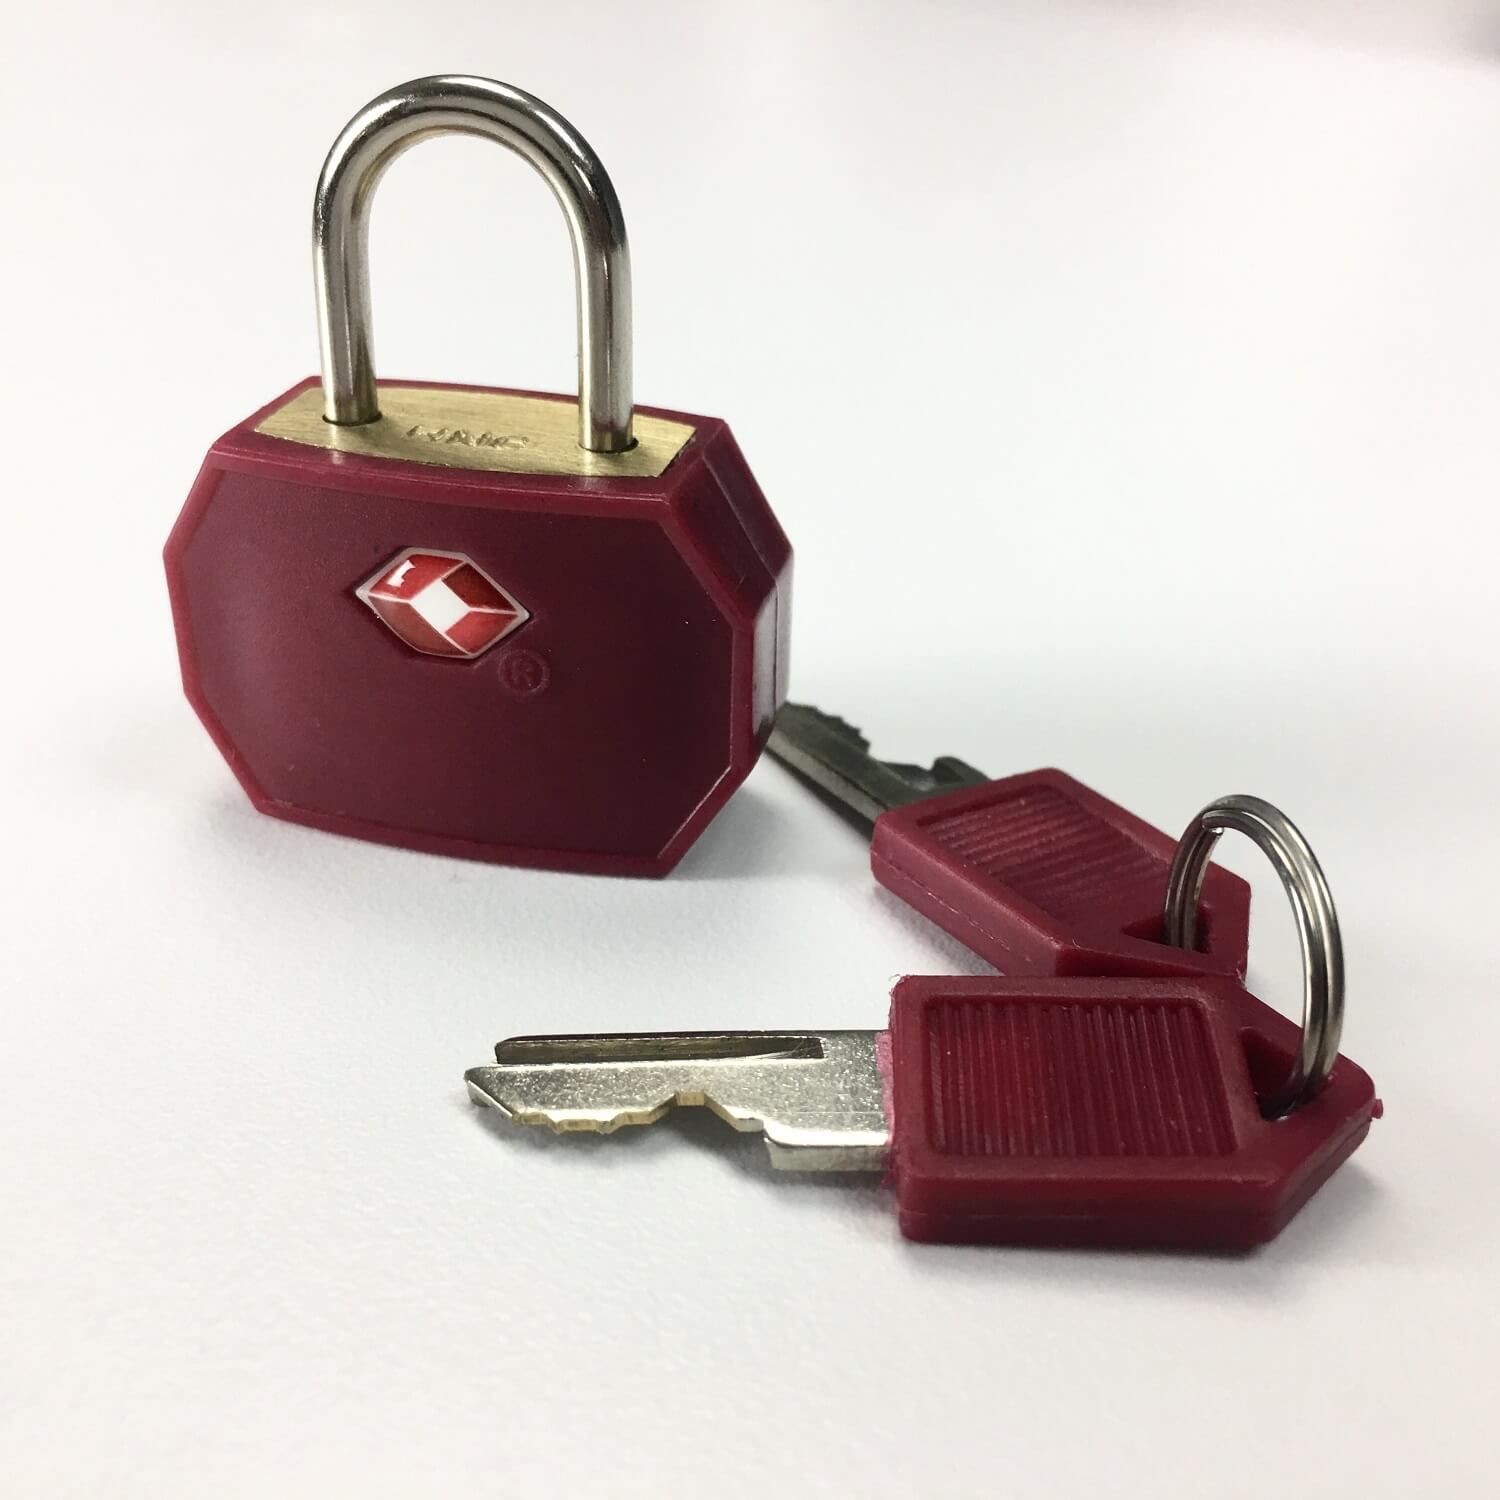 Padlock Accessories, Keying Options